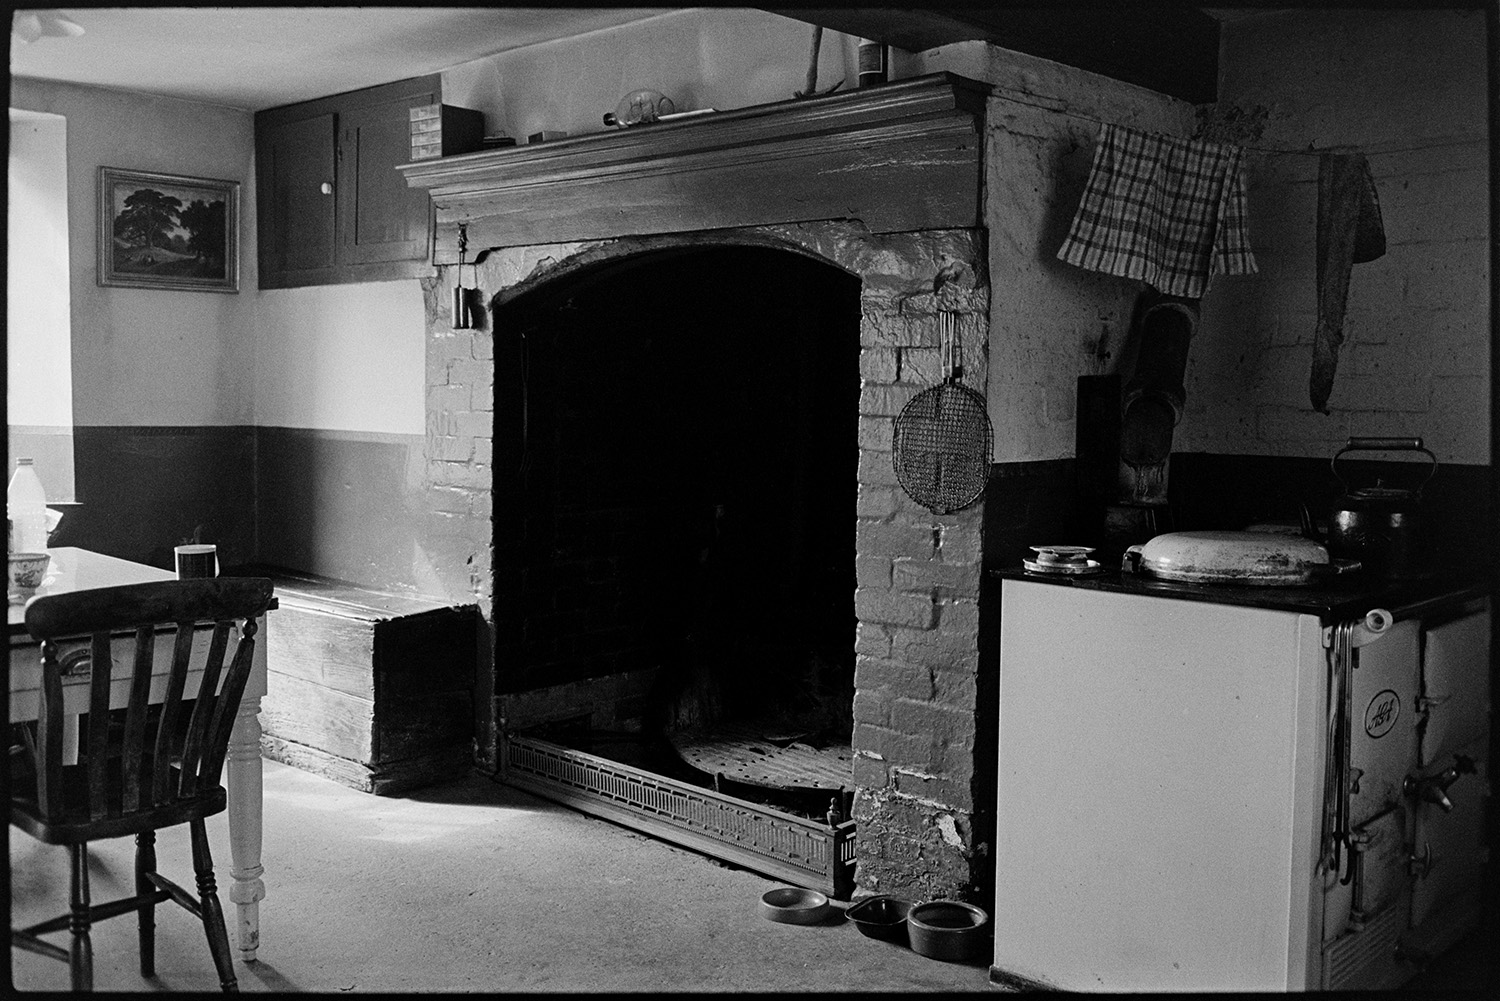 Fireplace and Rayburn stove in farmhouse. 
[The kitchen in a farmhouse at West Chapple, Winkleigh. An open fireplace and rayburn stove are visible, as well as a dining table and chair. A picture of a landscape scene is hung on the wall and a ship in a bottle is displayed on the mantelpiece.]